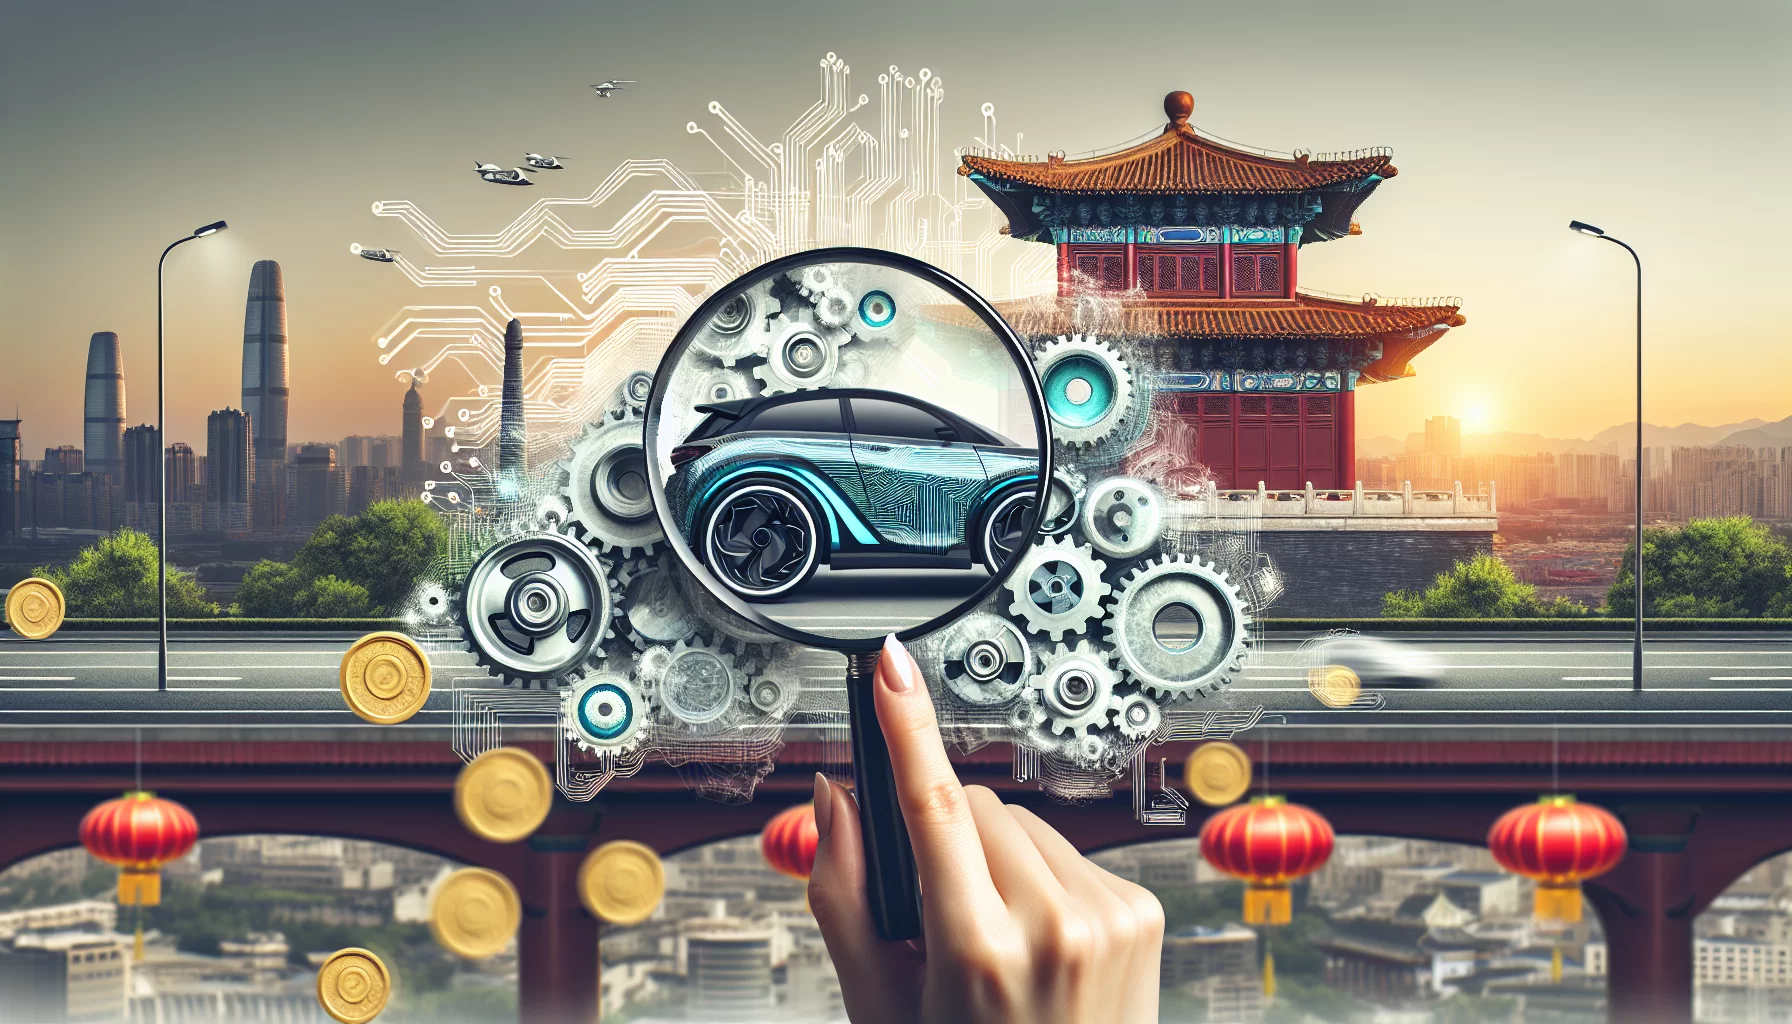 Cisco's strategic foray into China's electric vehicle market: opportunities and implications for investors